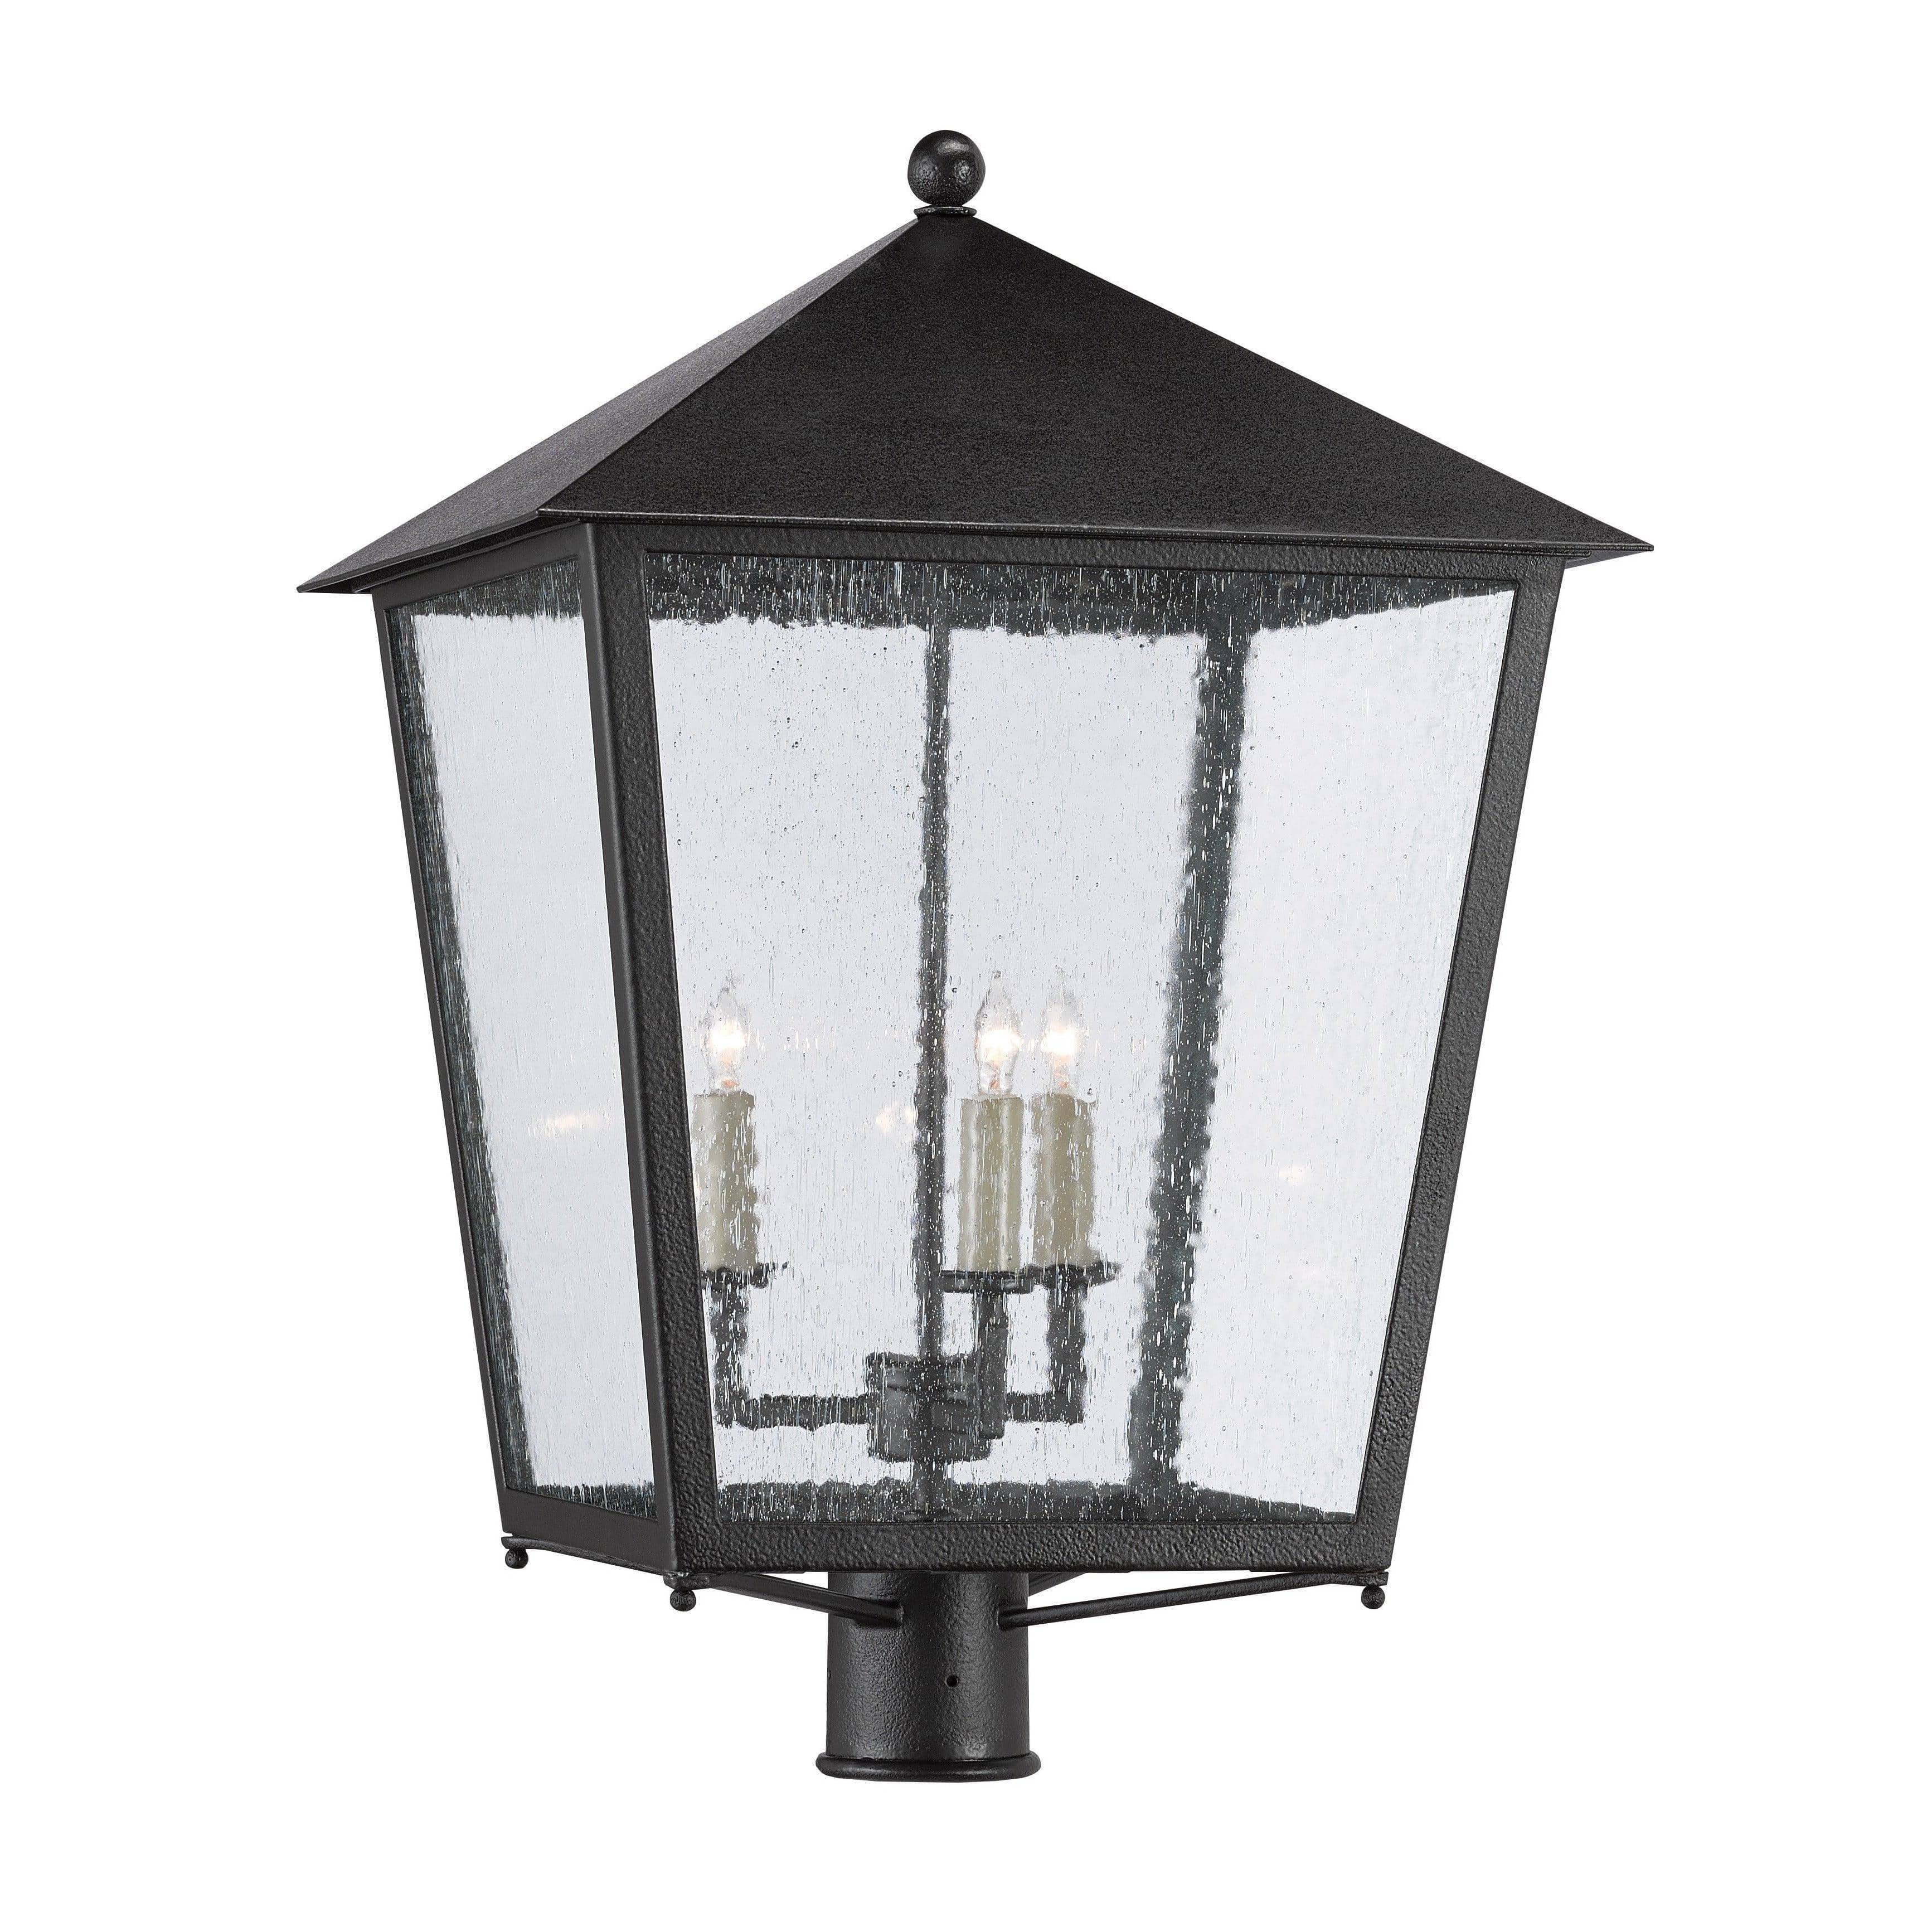 Currey and Company - Bening Post Mount - 9600-0006 | Montreal Lighting & Hardware